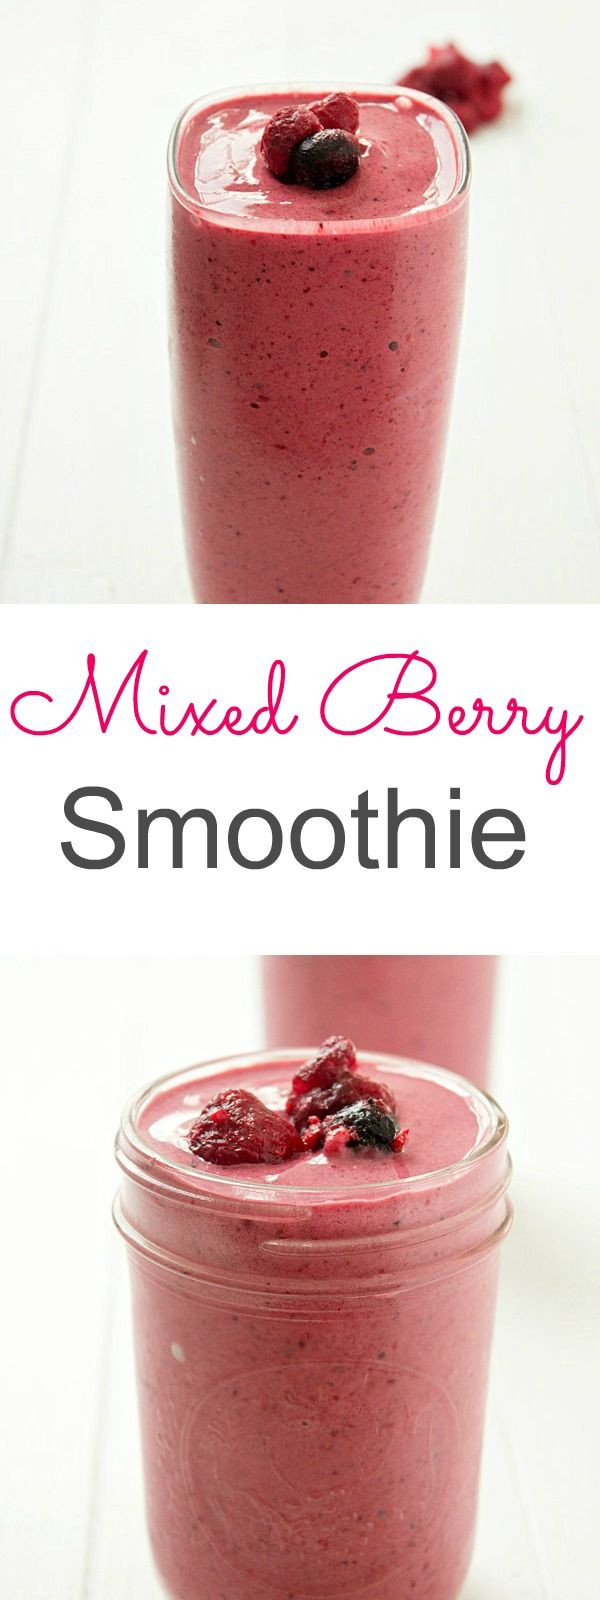 23 Of the Best Ideas for Yogurt Fruit Smoothies Recipes - Best Recipes ...